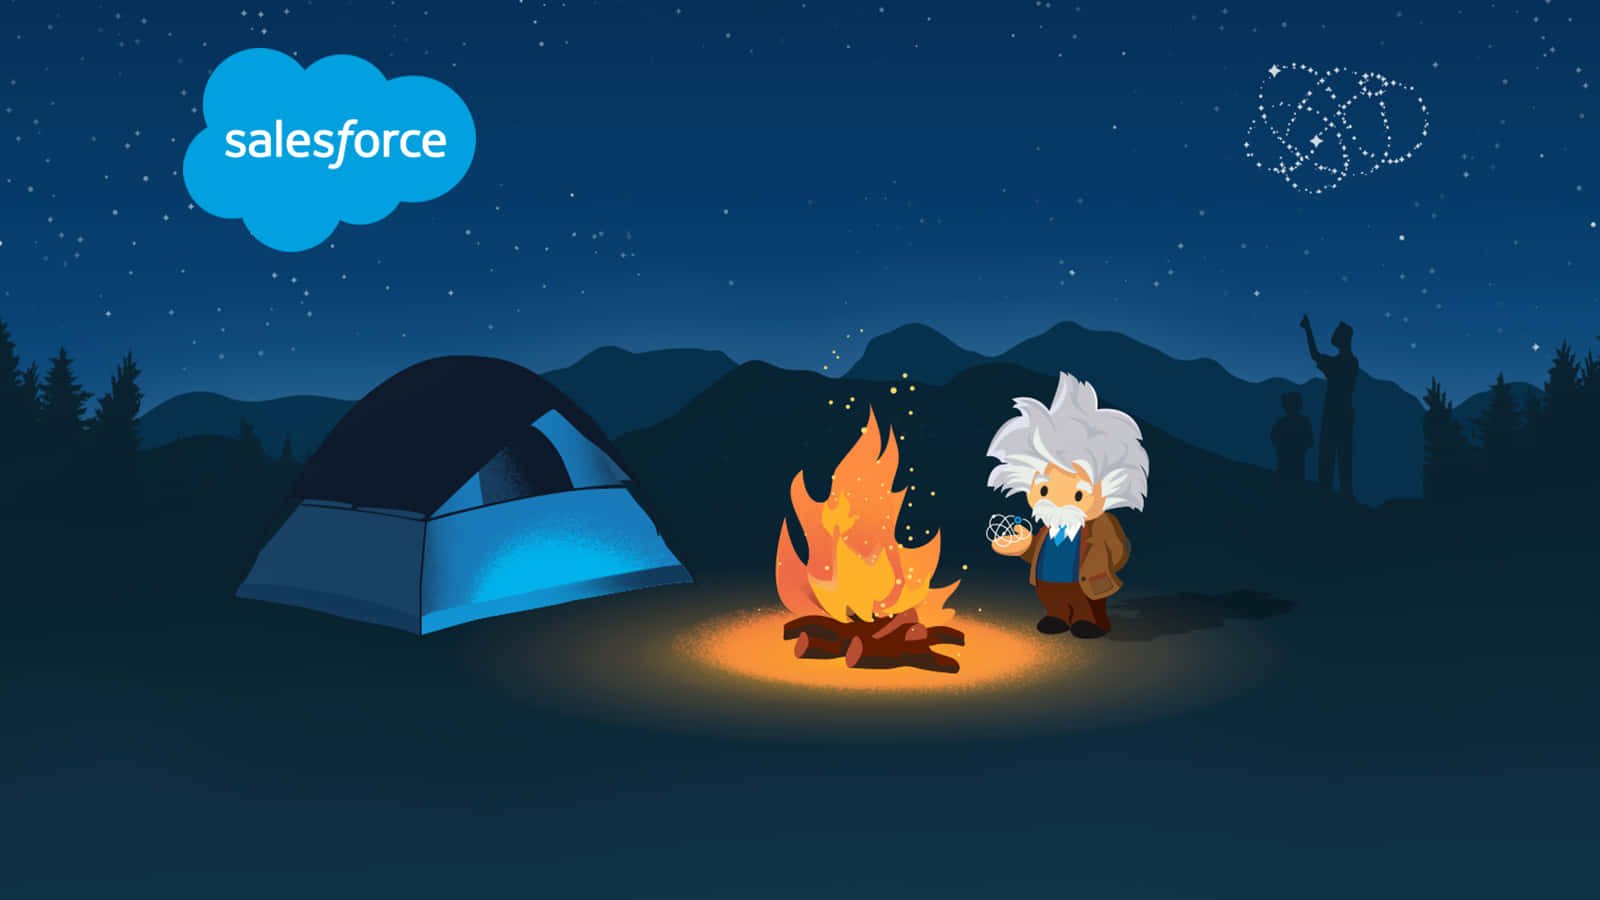 A Cartoon Character Is Sitting By A Campfire Wallpaper